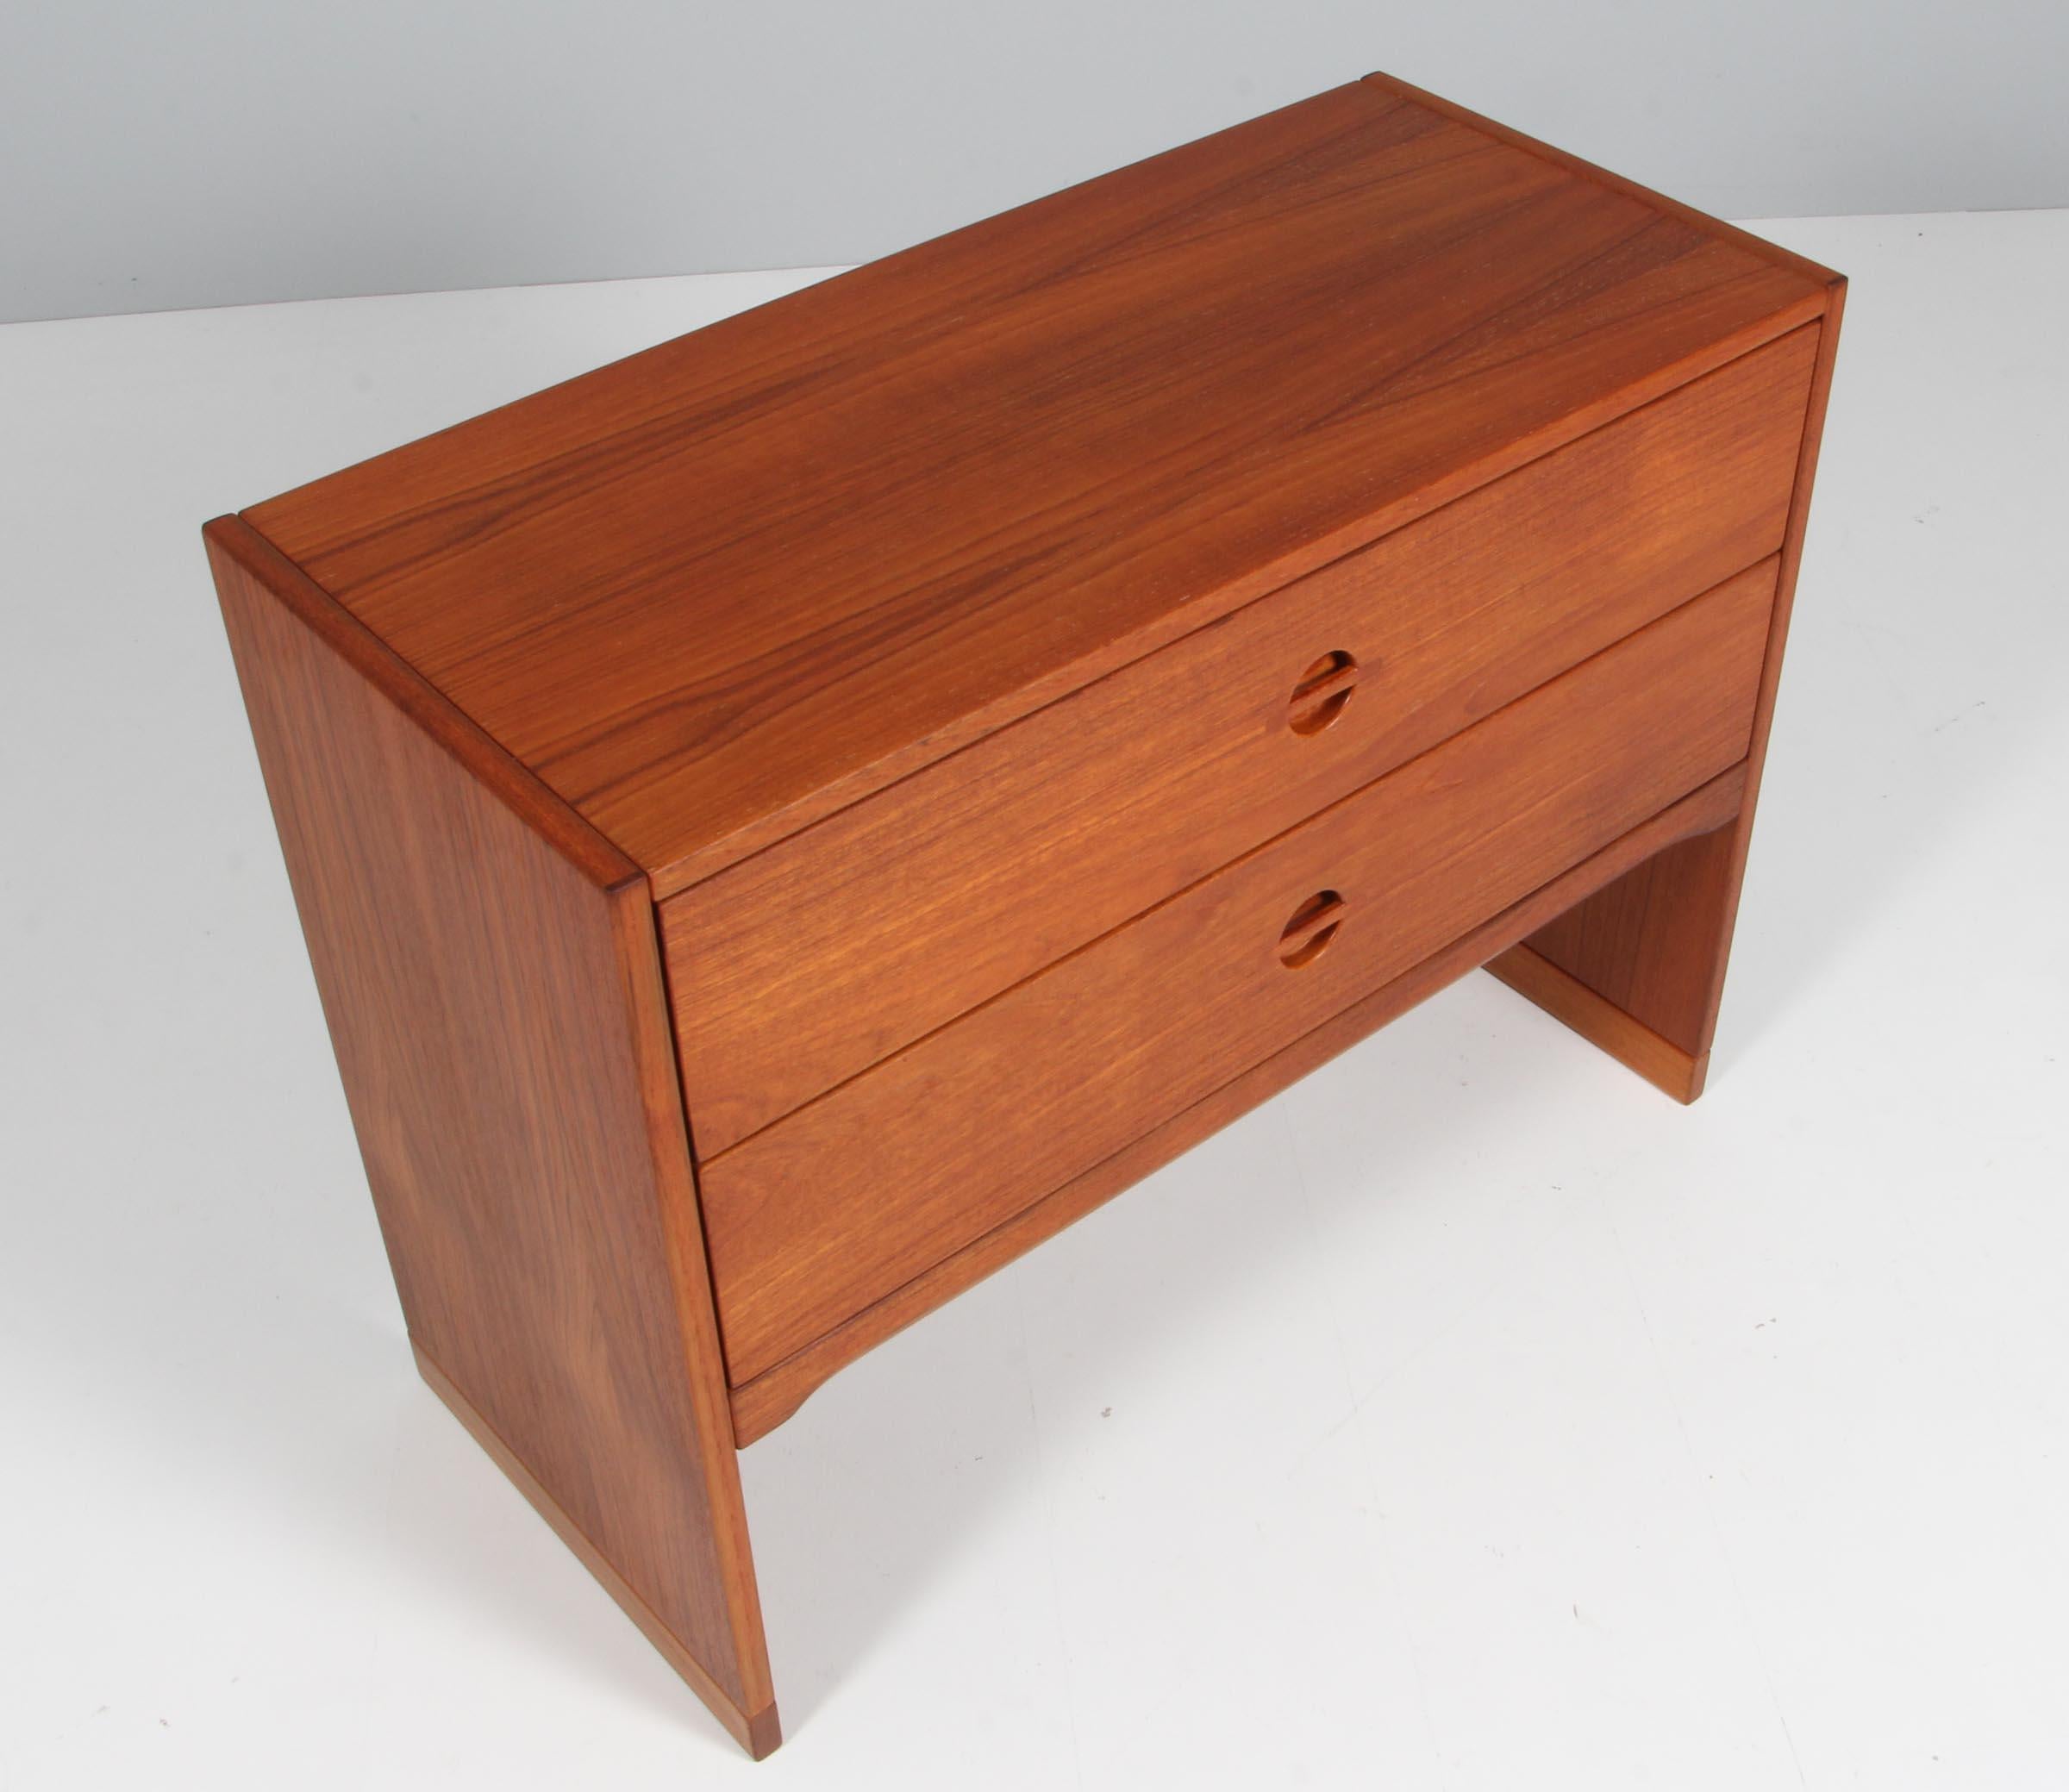 Ebbe Gehl for Aksel Kjersgaard chest of drawers made of teak. 

Made in the 1960s.